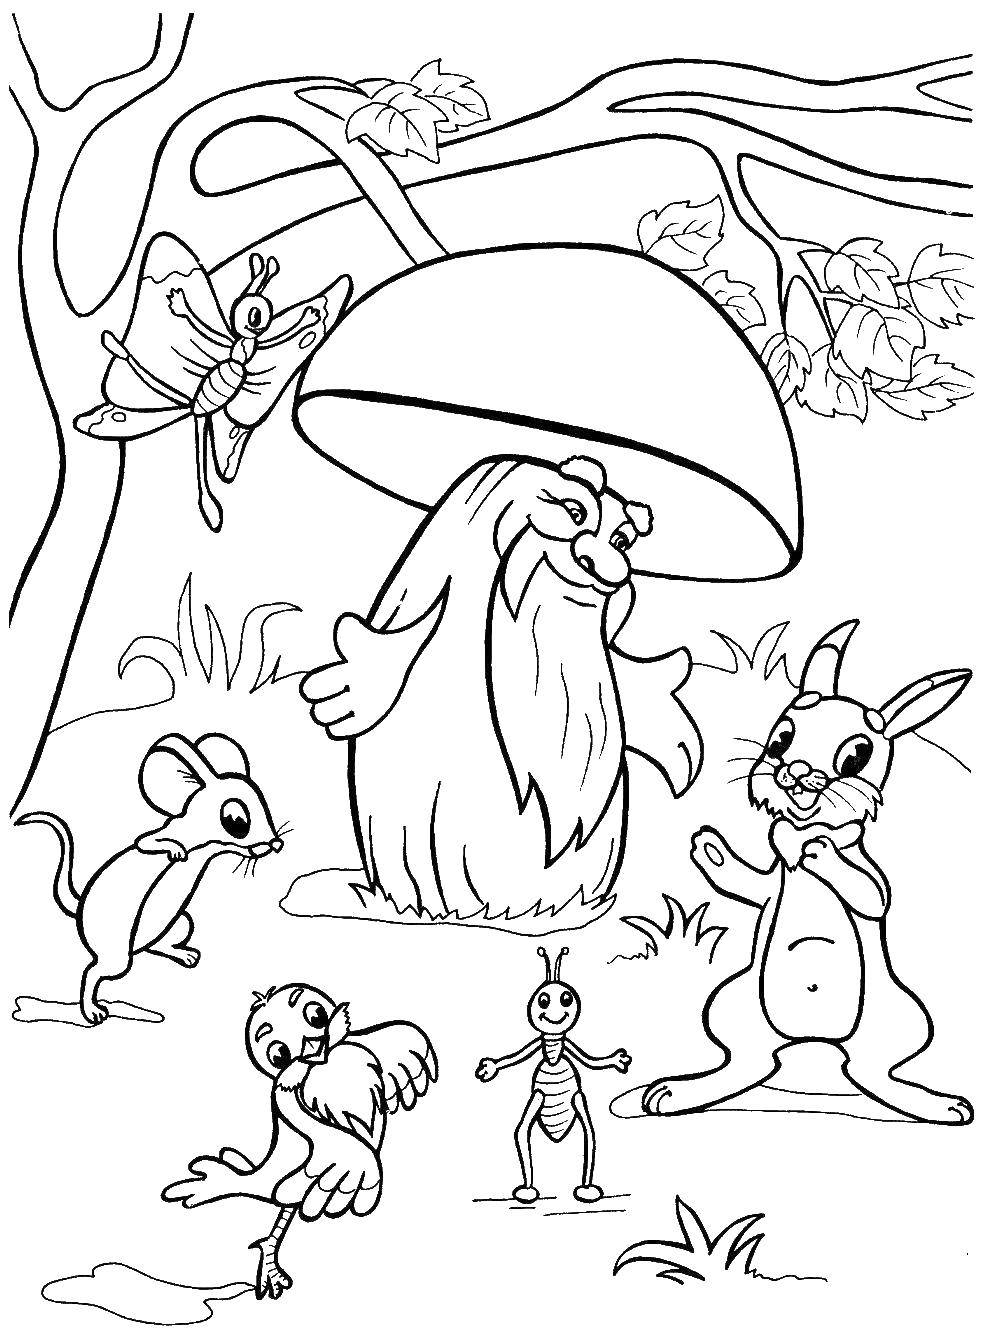 Coloring Wise fungus and animals. Category Fairy tales. Tags:  Fairy tales.